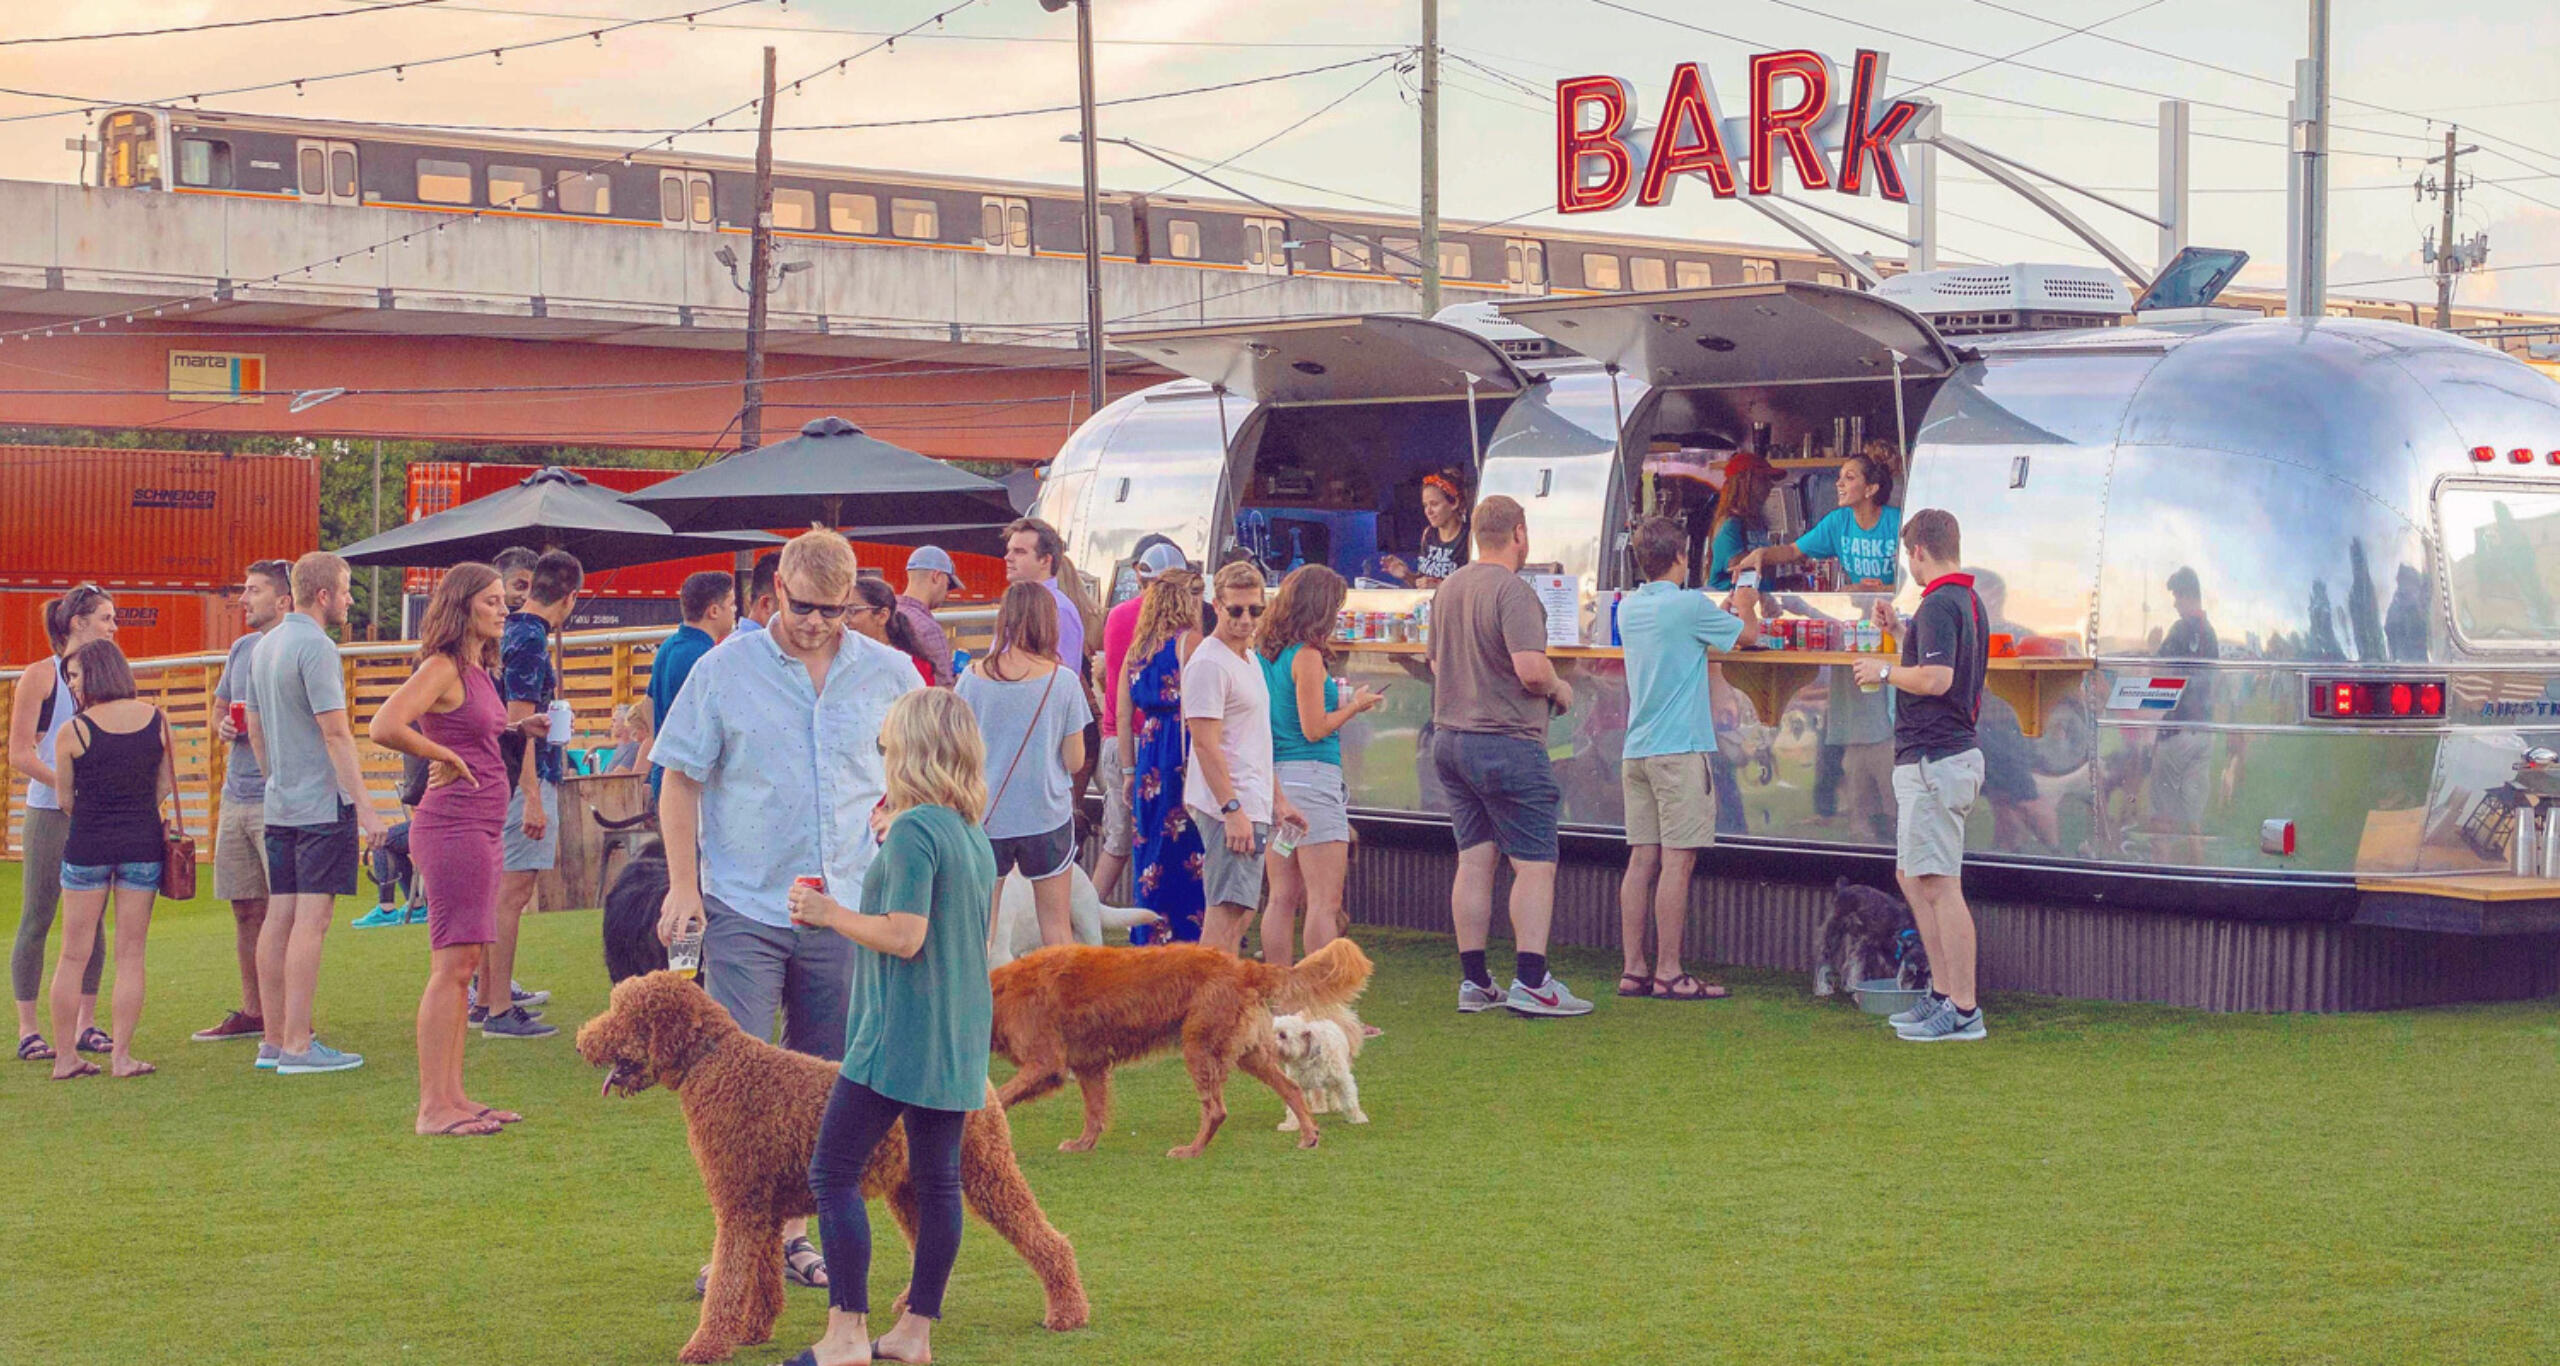 Fetch Park Buckhead with dogs and people visiting an Airstream trailer vending food